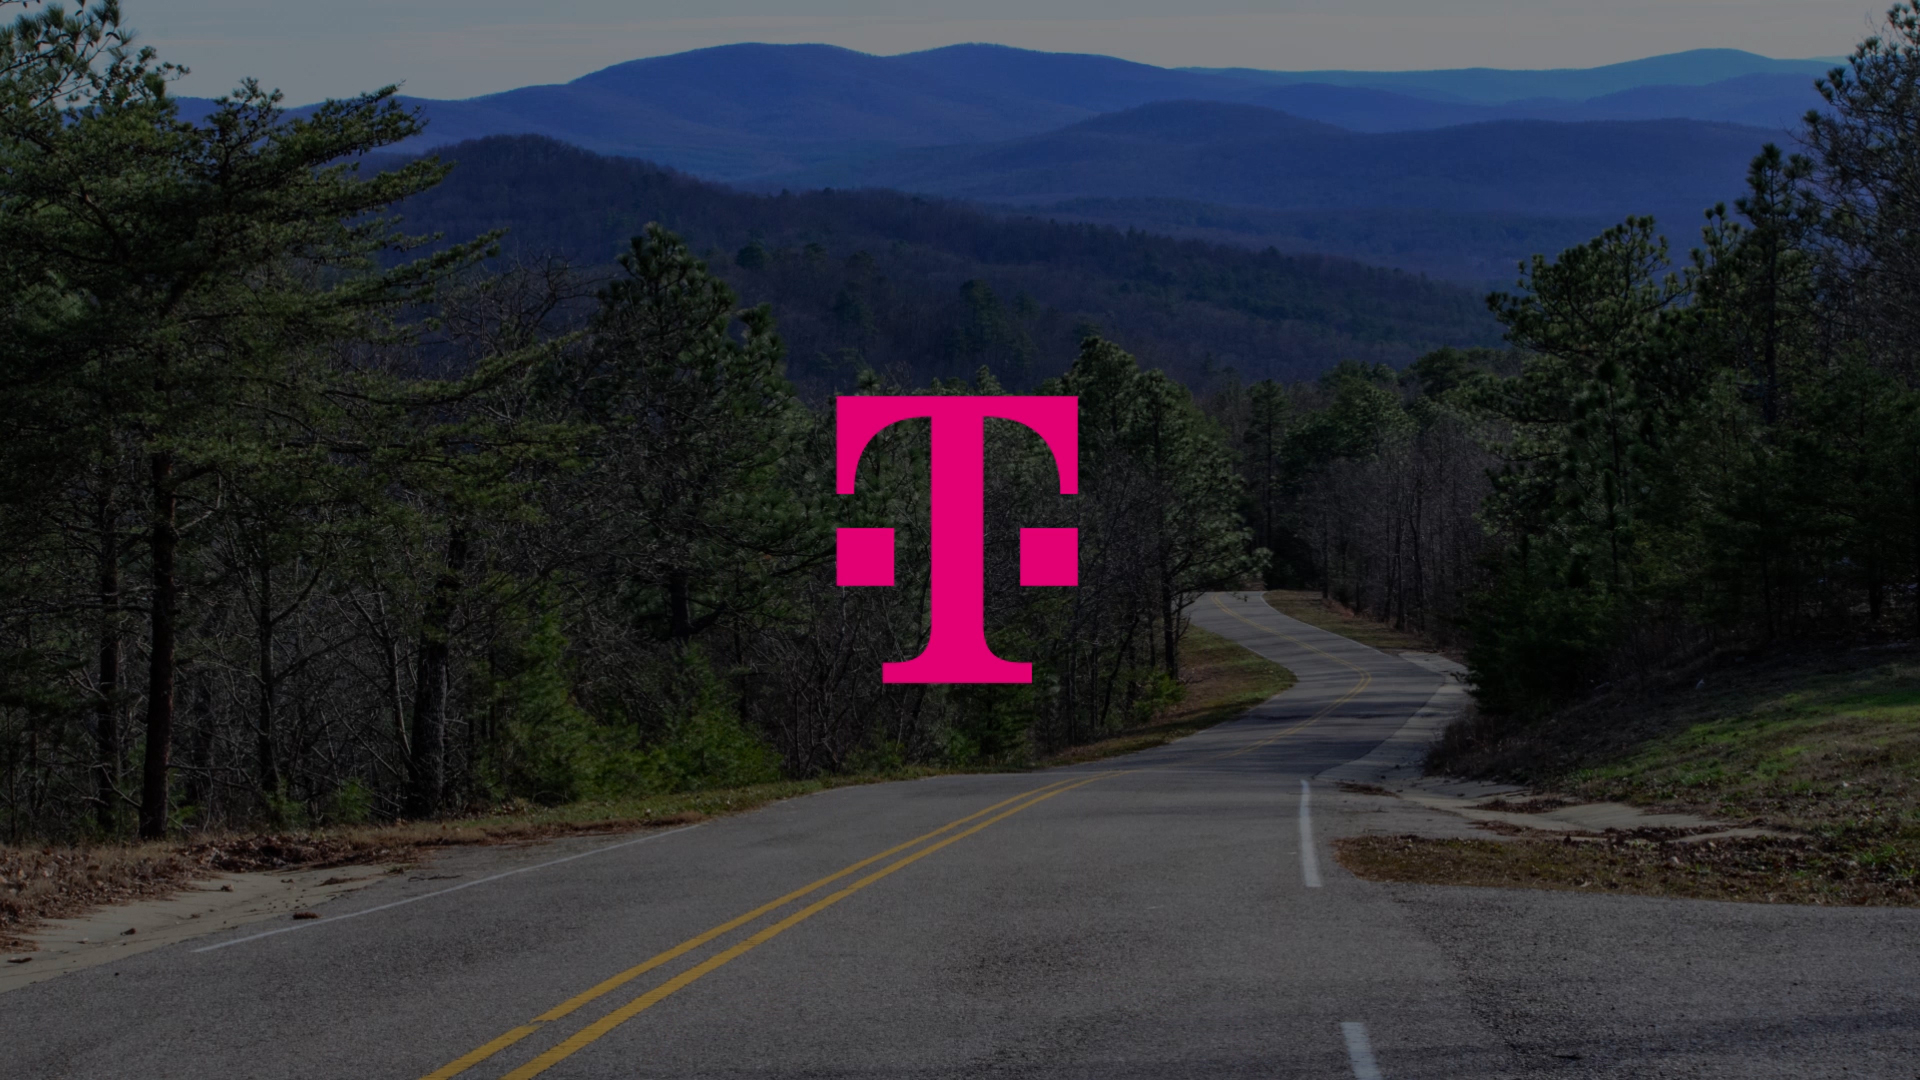 T-Mobile Helps Drive Local Change with Over $12 Million in Hometown Grants